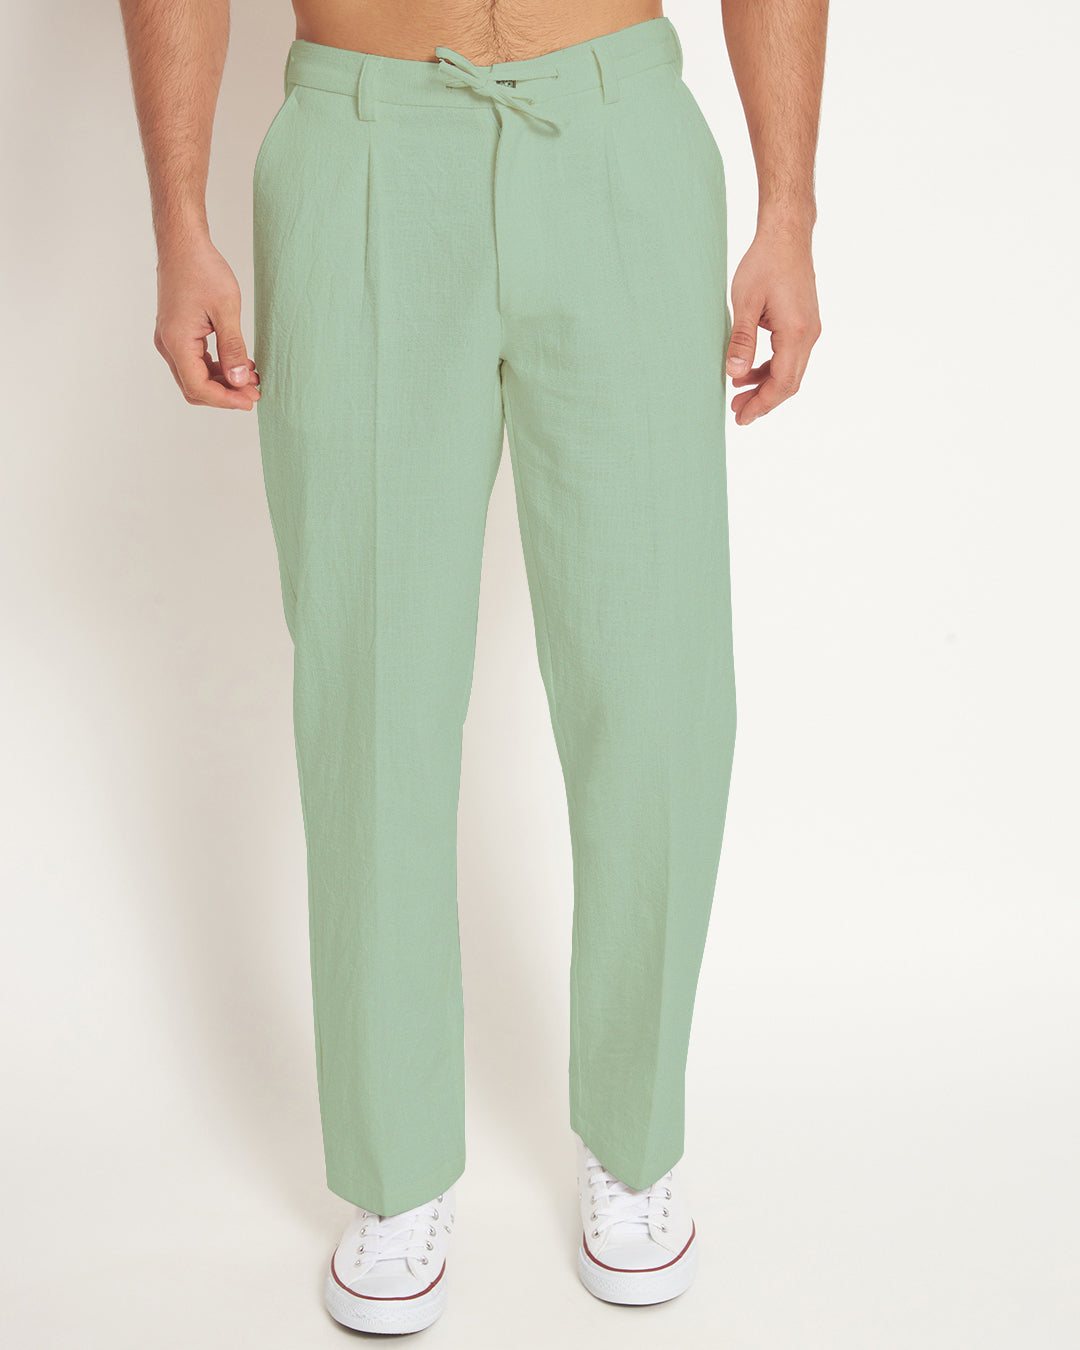 Combo: Casual Ease Spring Green & Iced Grey Men's Pants - Set of 2